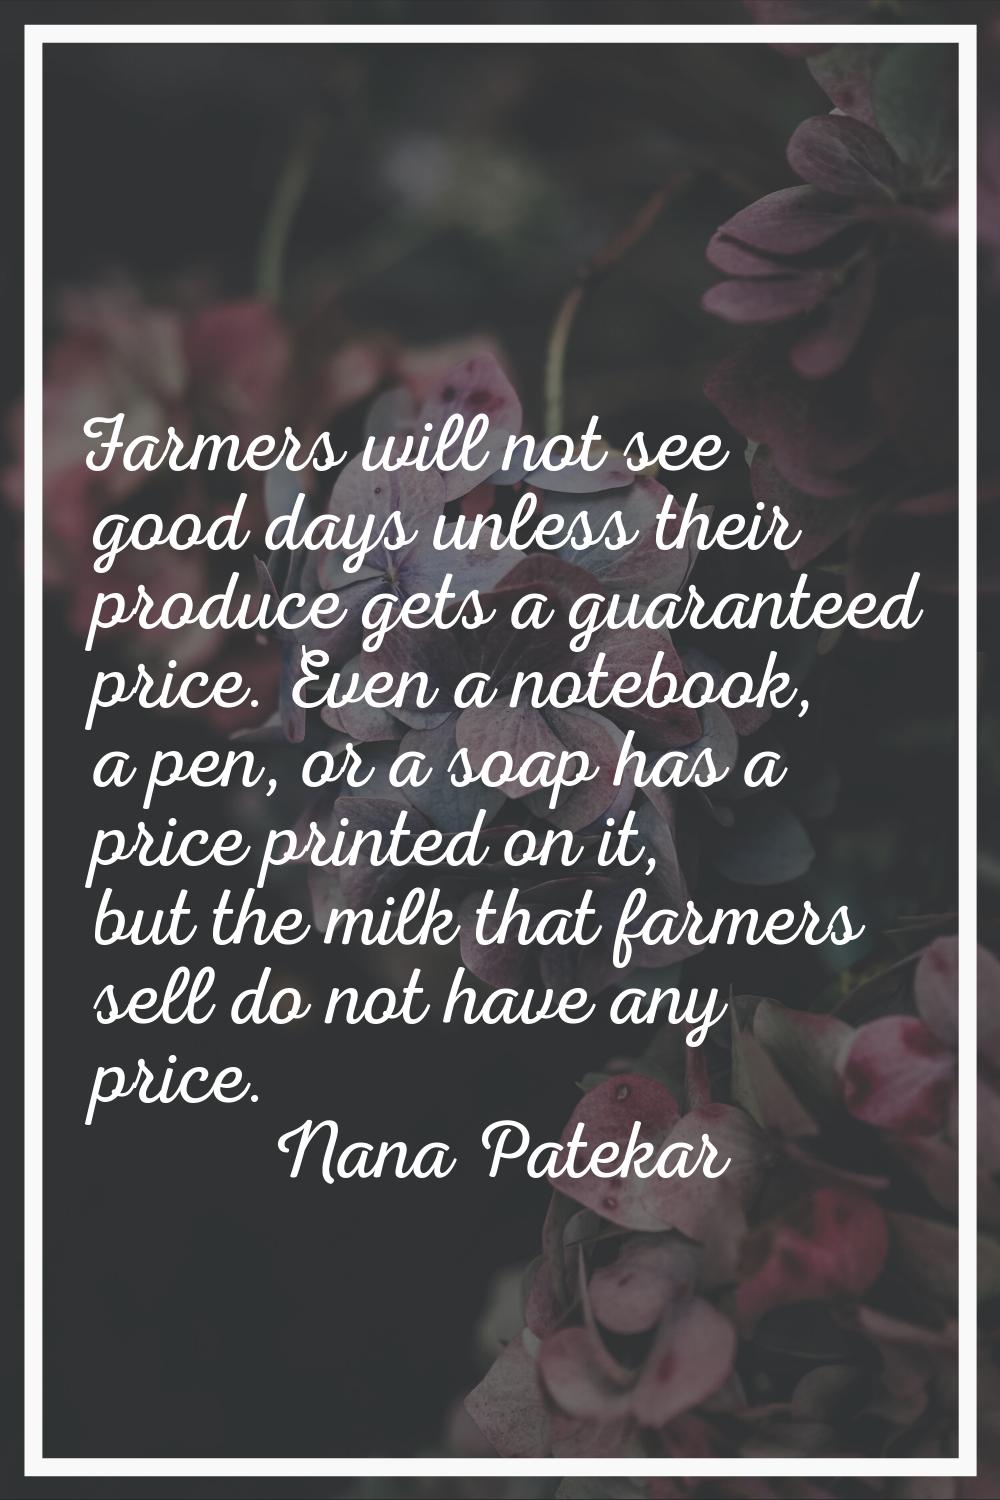 Farmers will not see good days unless their produce gets a guaranteed price. Even a notebook, a pen